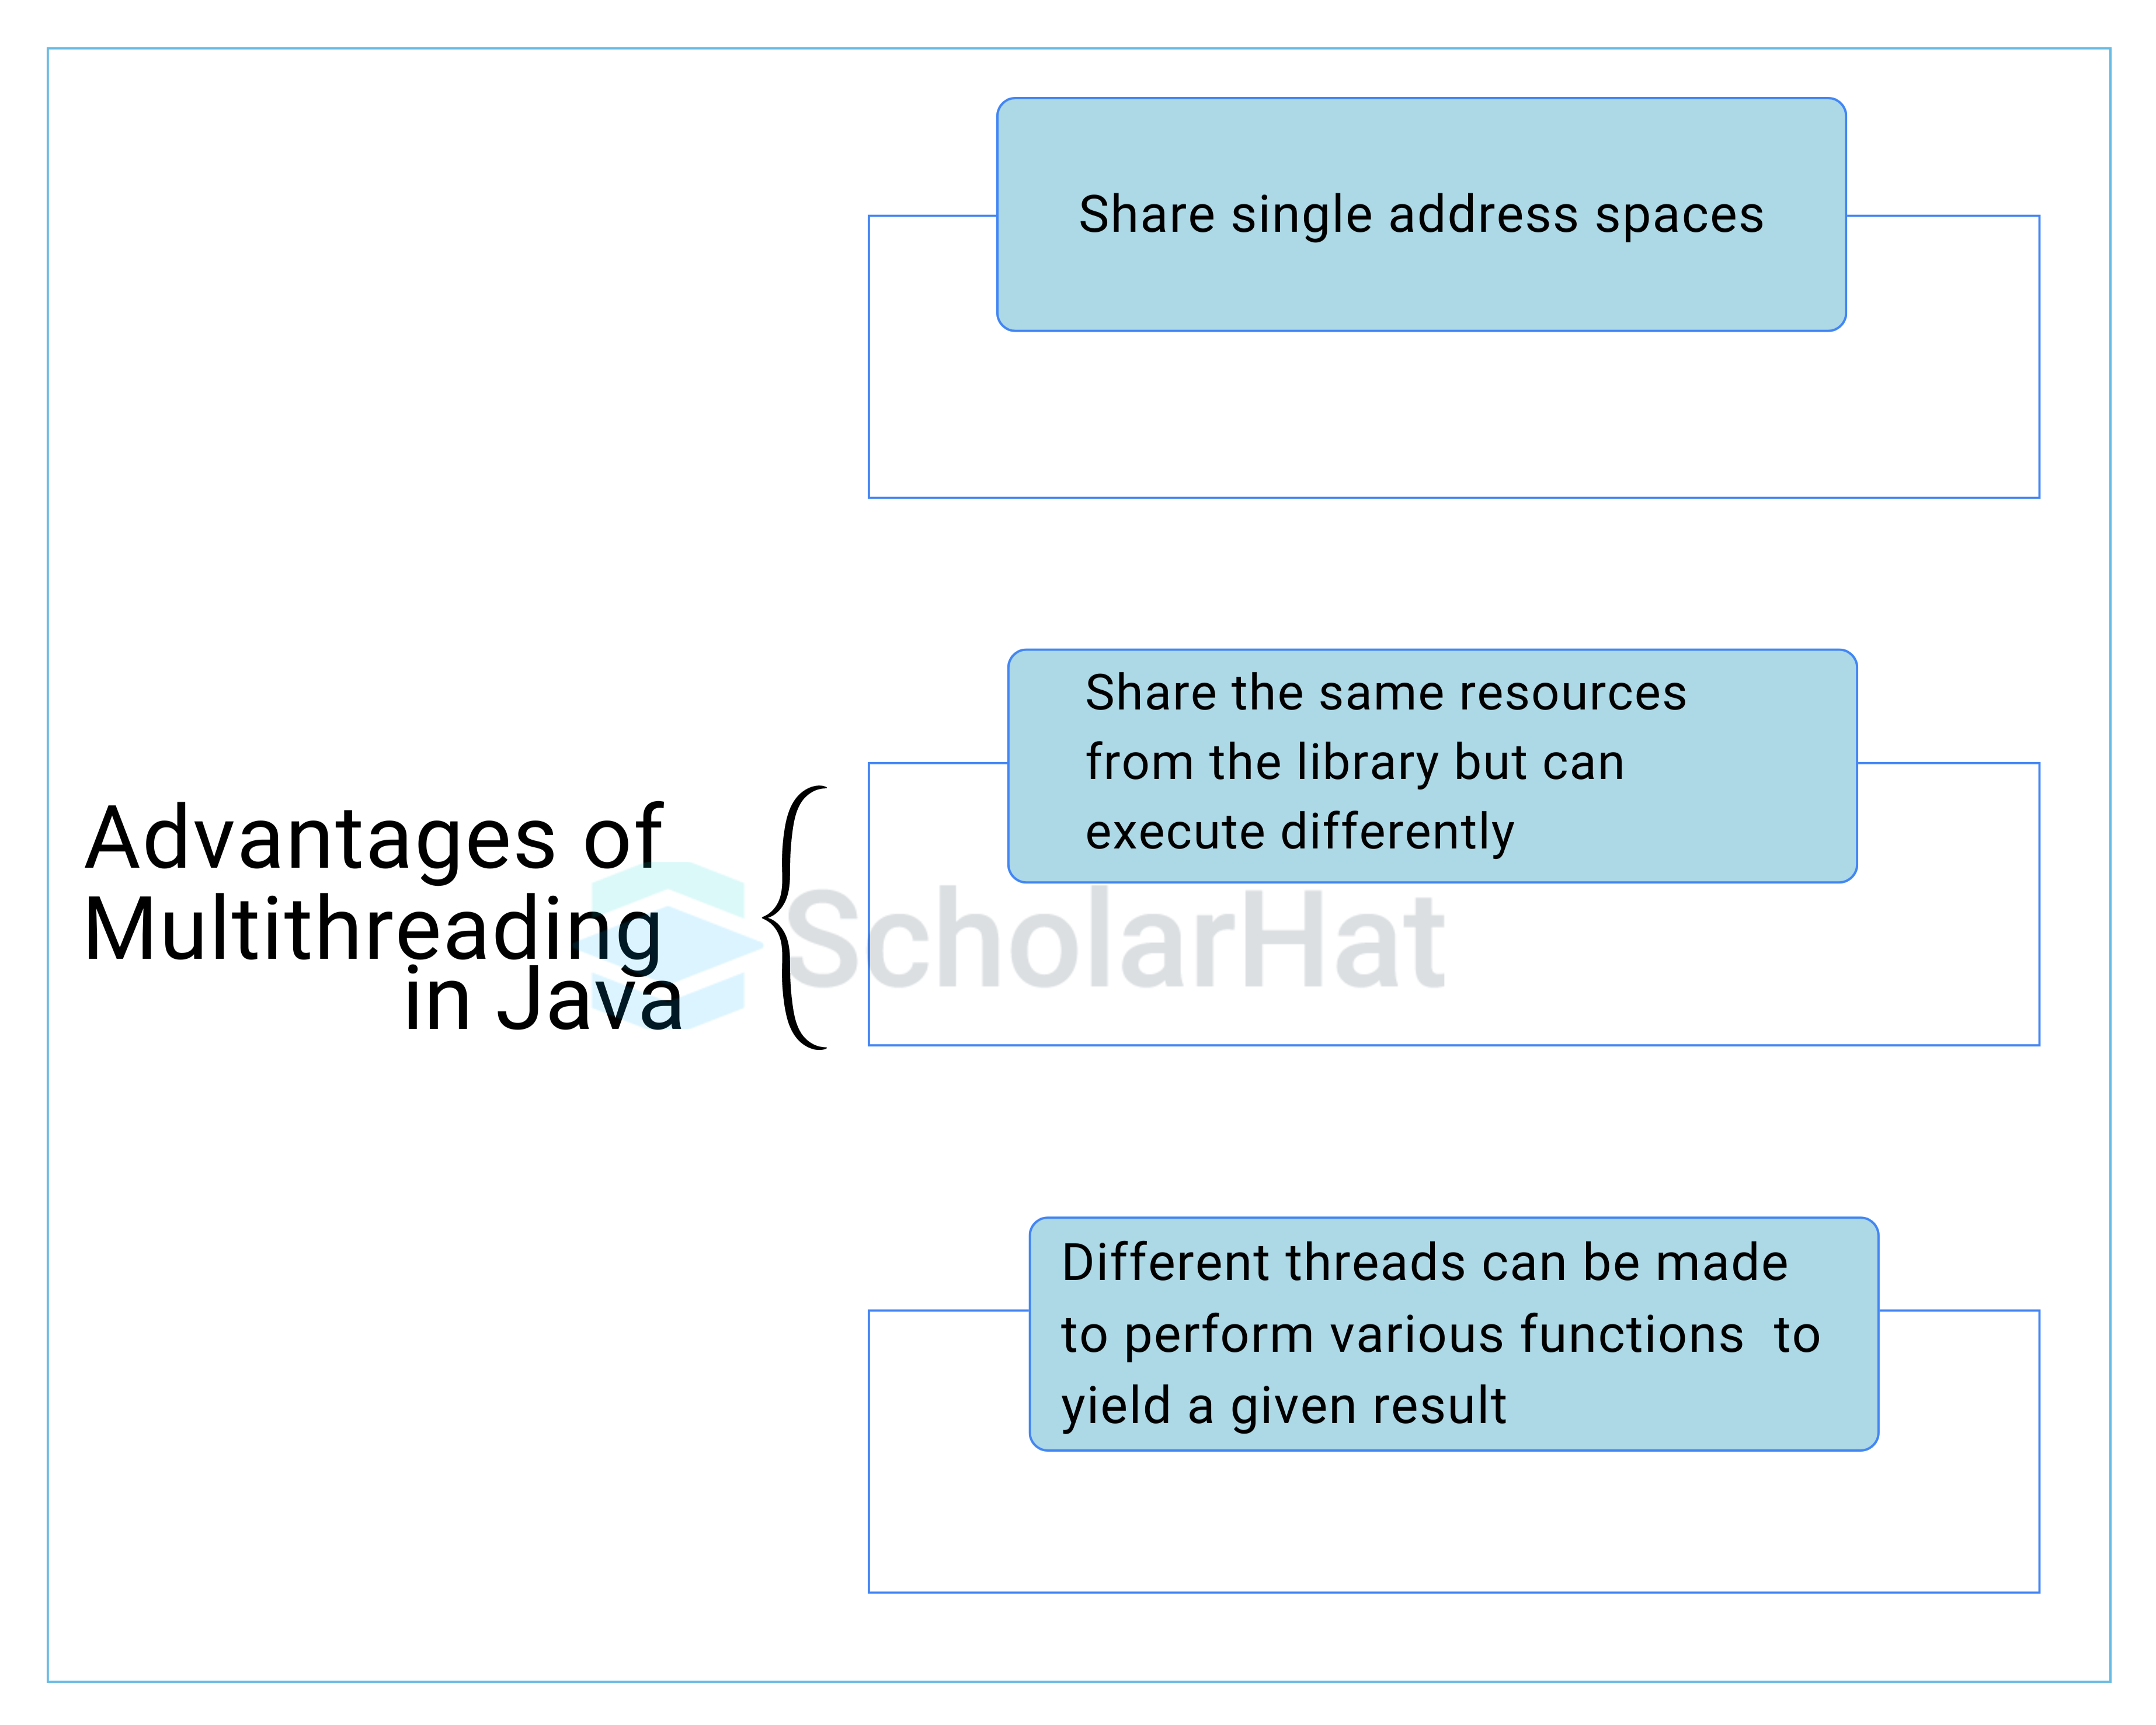 What are some fundamental advantages of multithreading in Java?